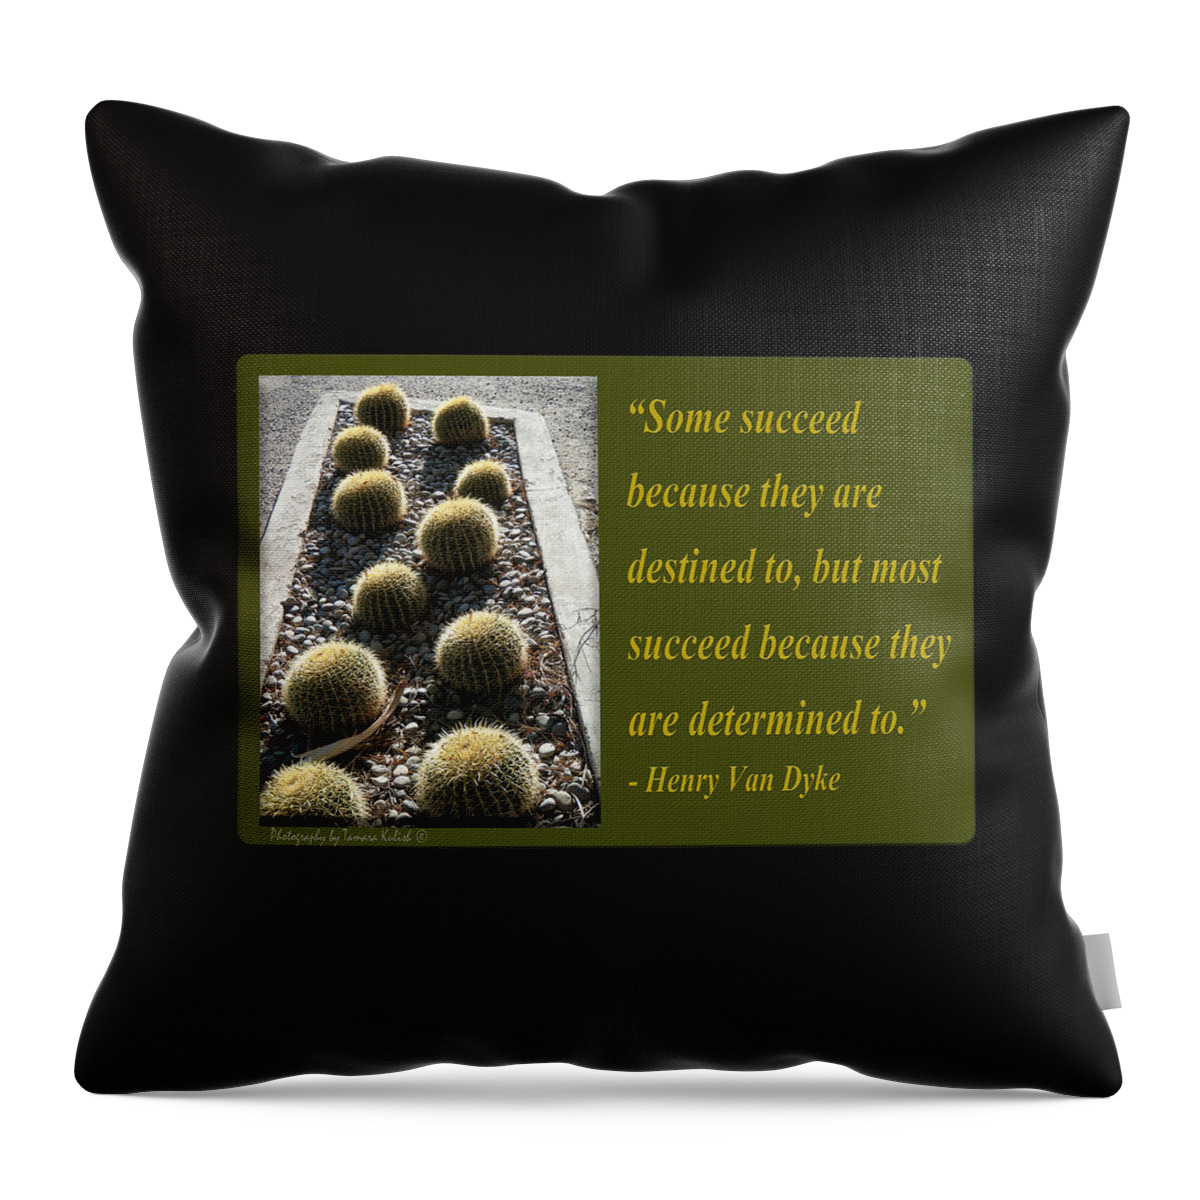 Arizona Throw Pillow featuring the photograph Some succeed because they are destined to by Tamara Kulish